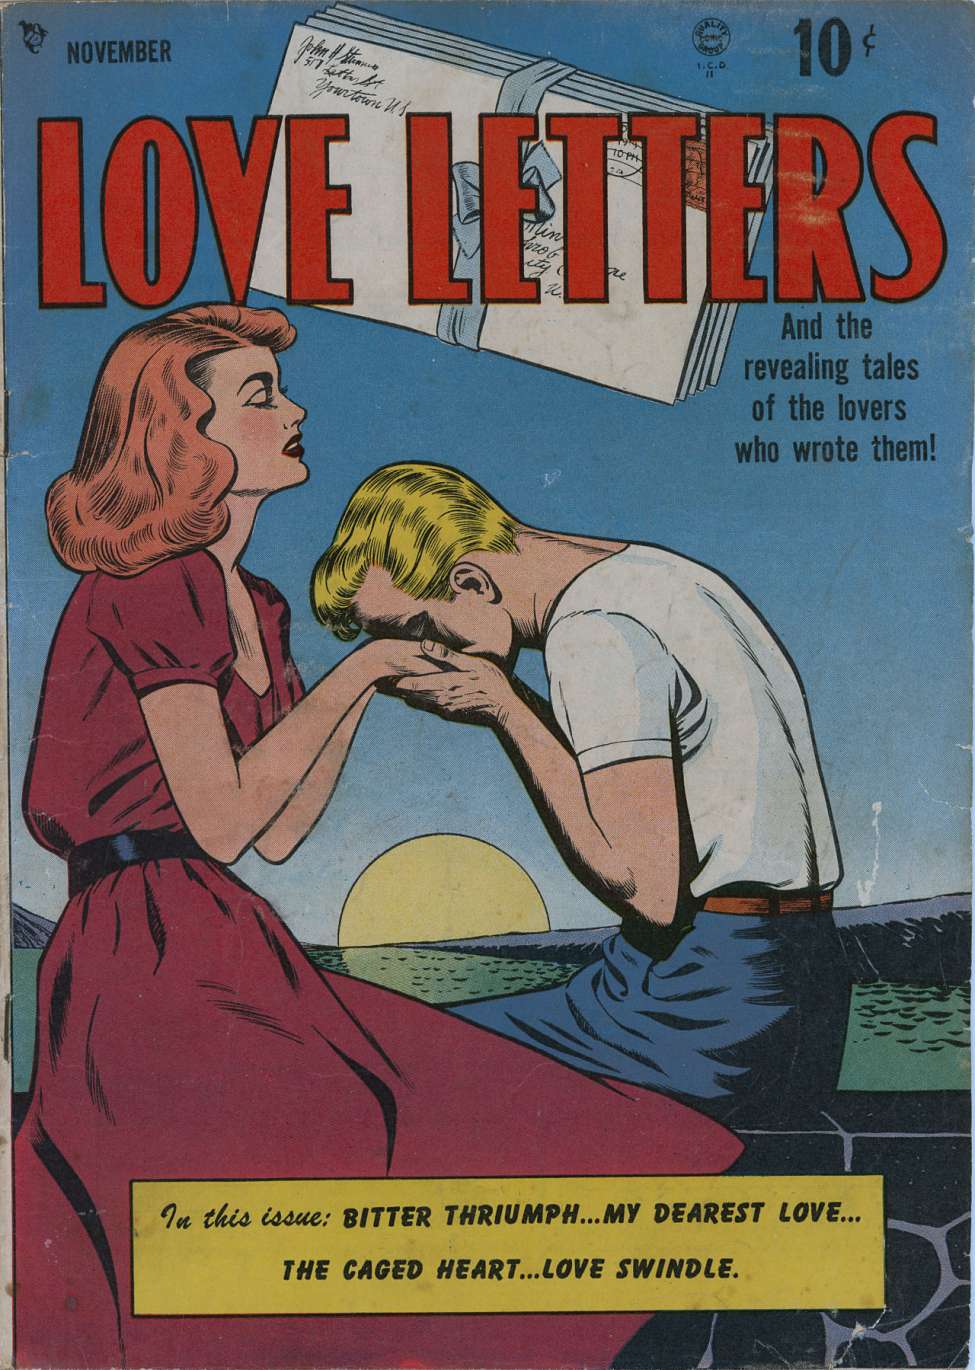 Book Cover For Love Letters 1